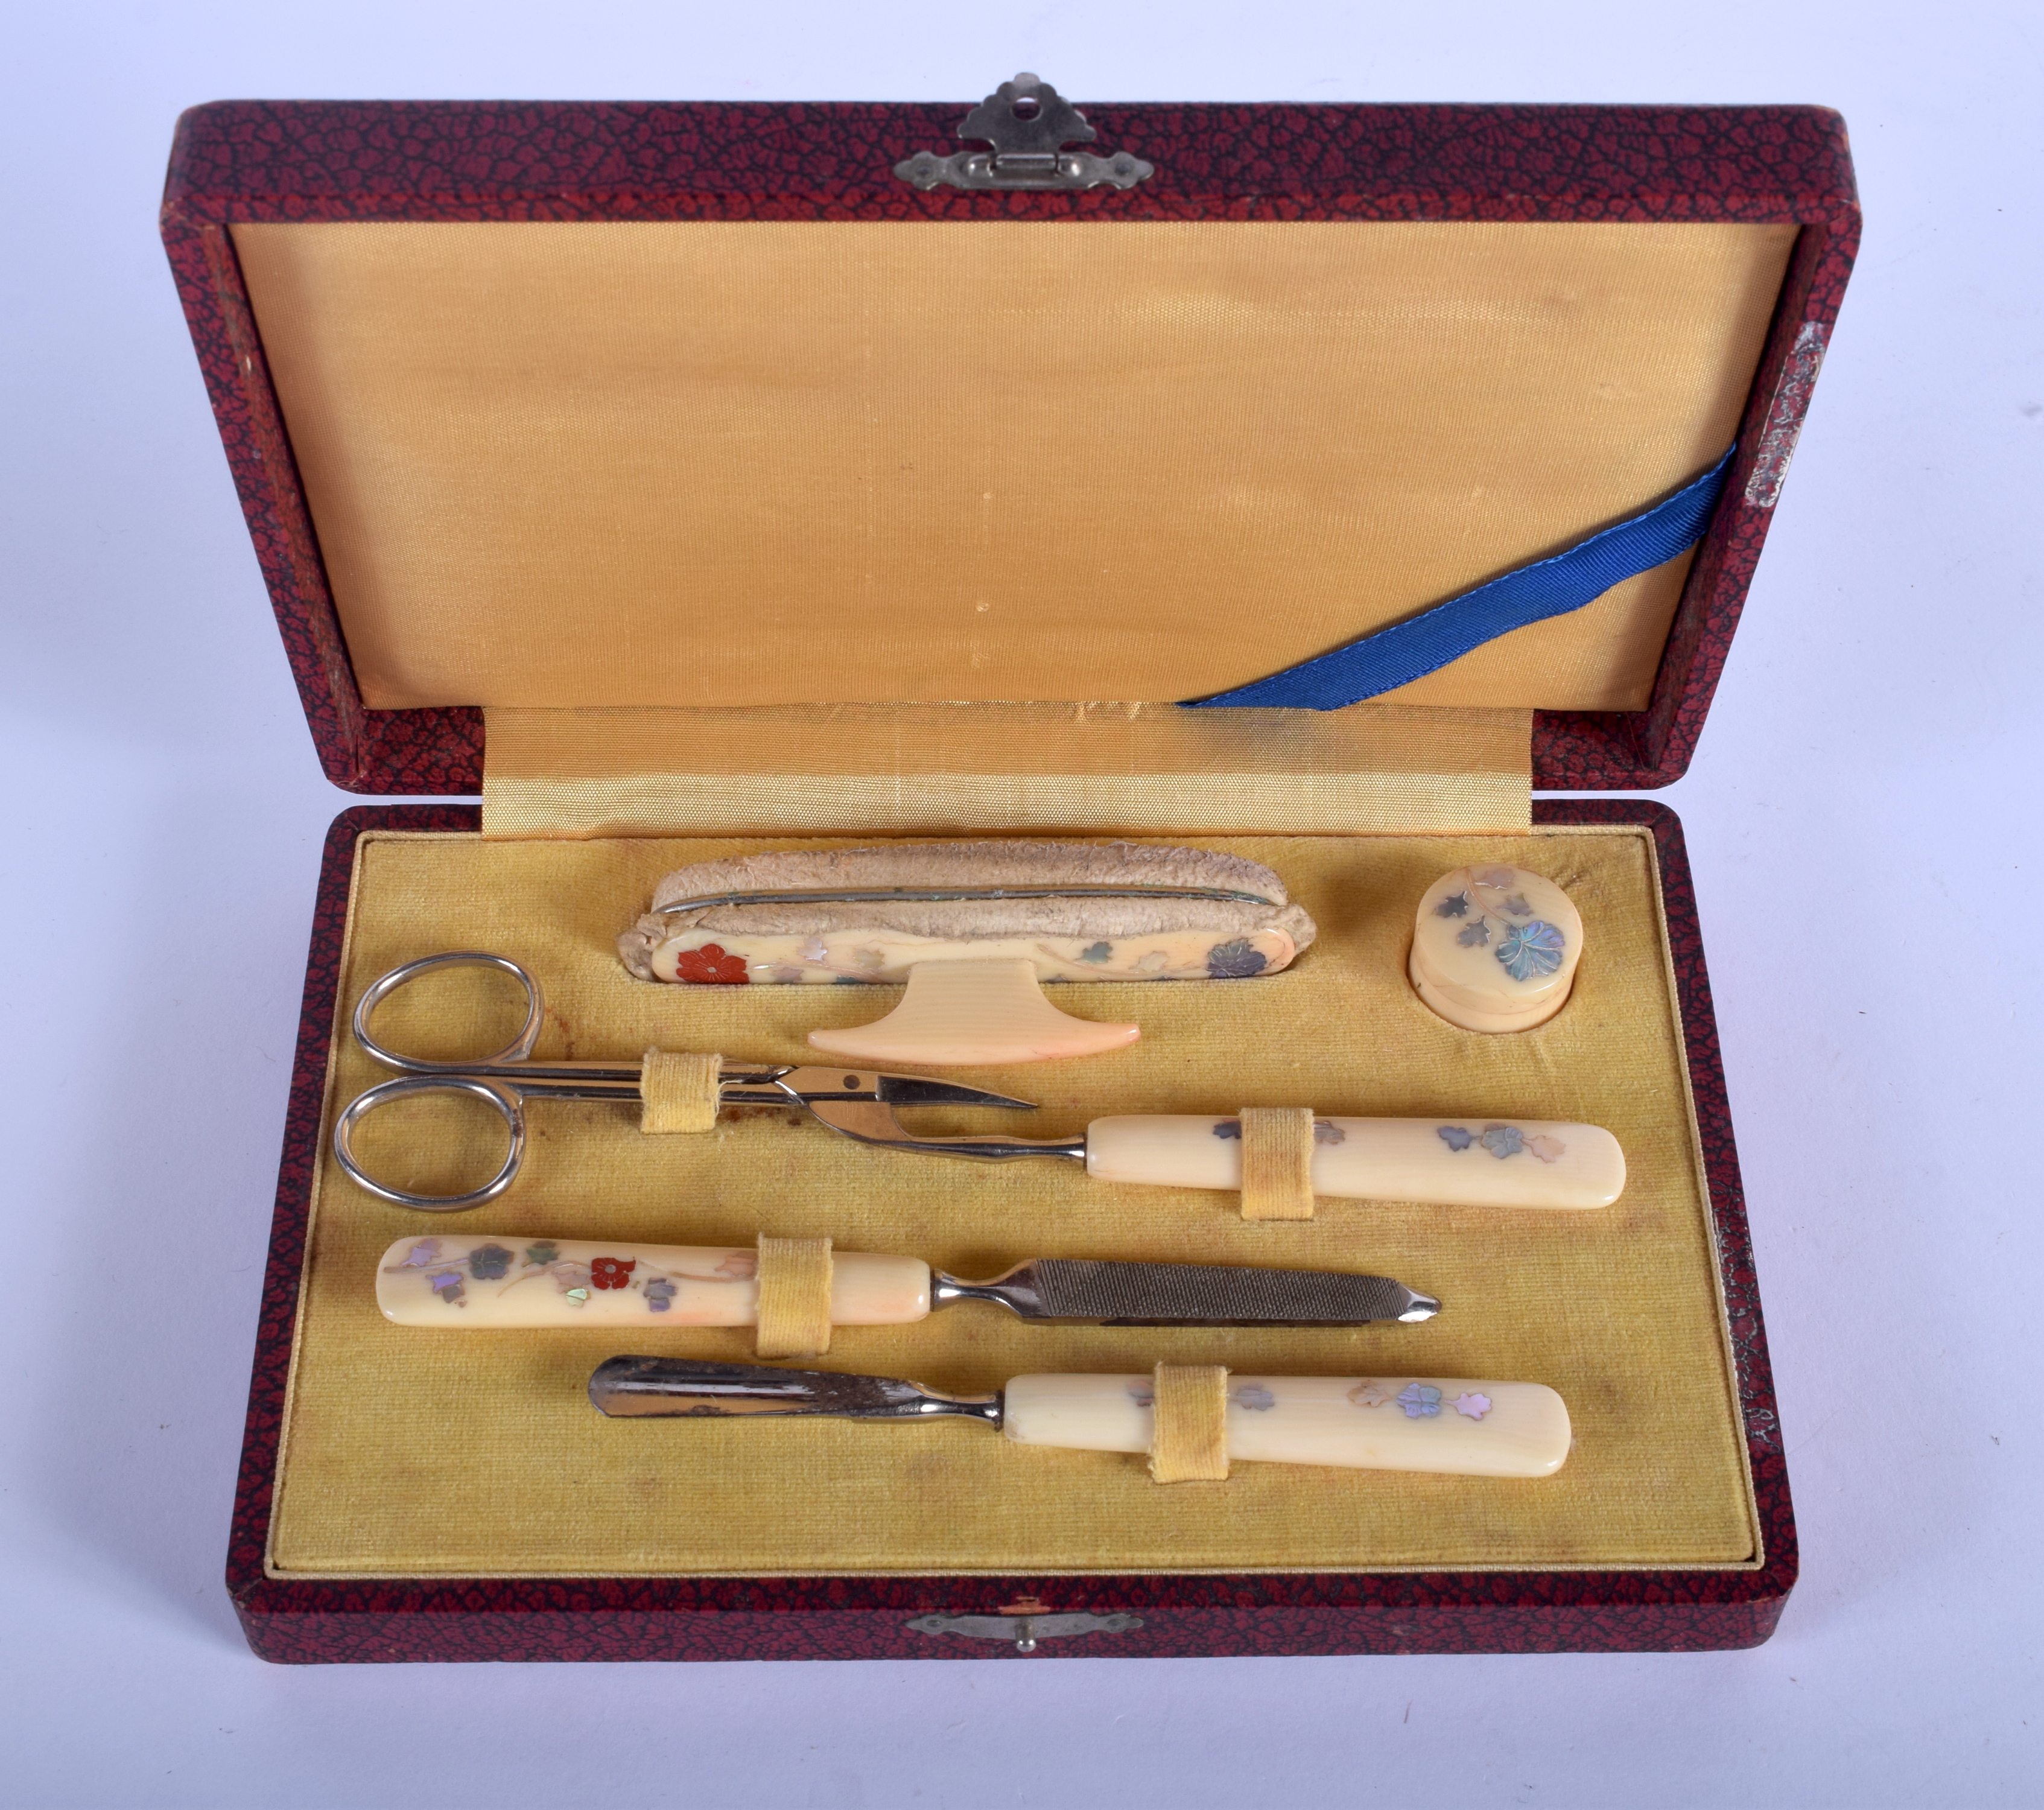 AN EARLY 20TH CENTURY JAPANESE MEIJI PERIOD CARVED SHIBAYAMA IVORY SEWING KIT. (qty)